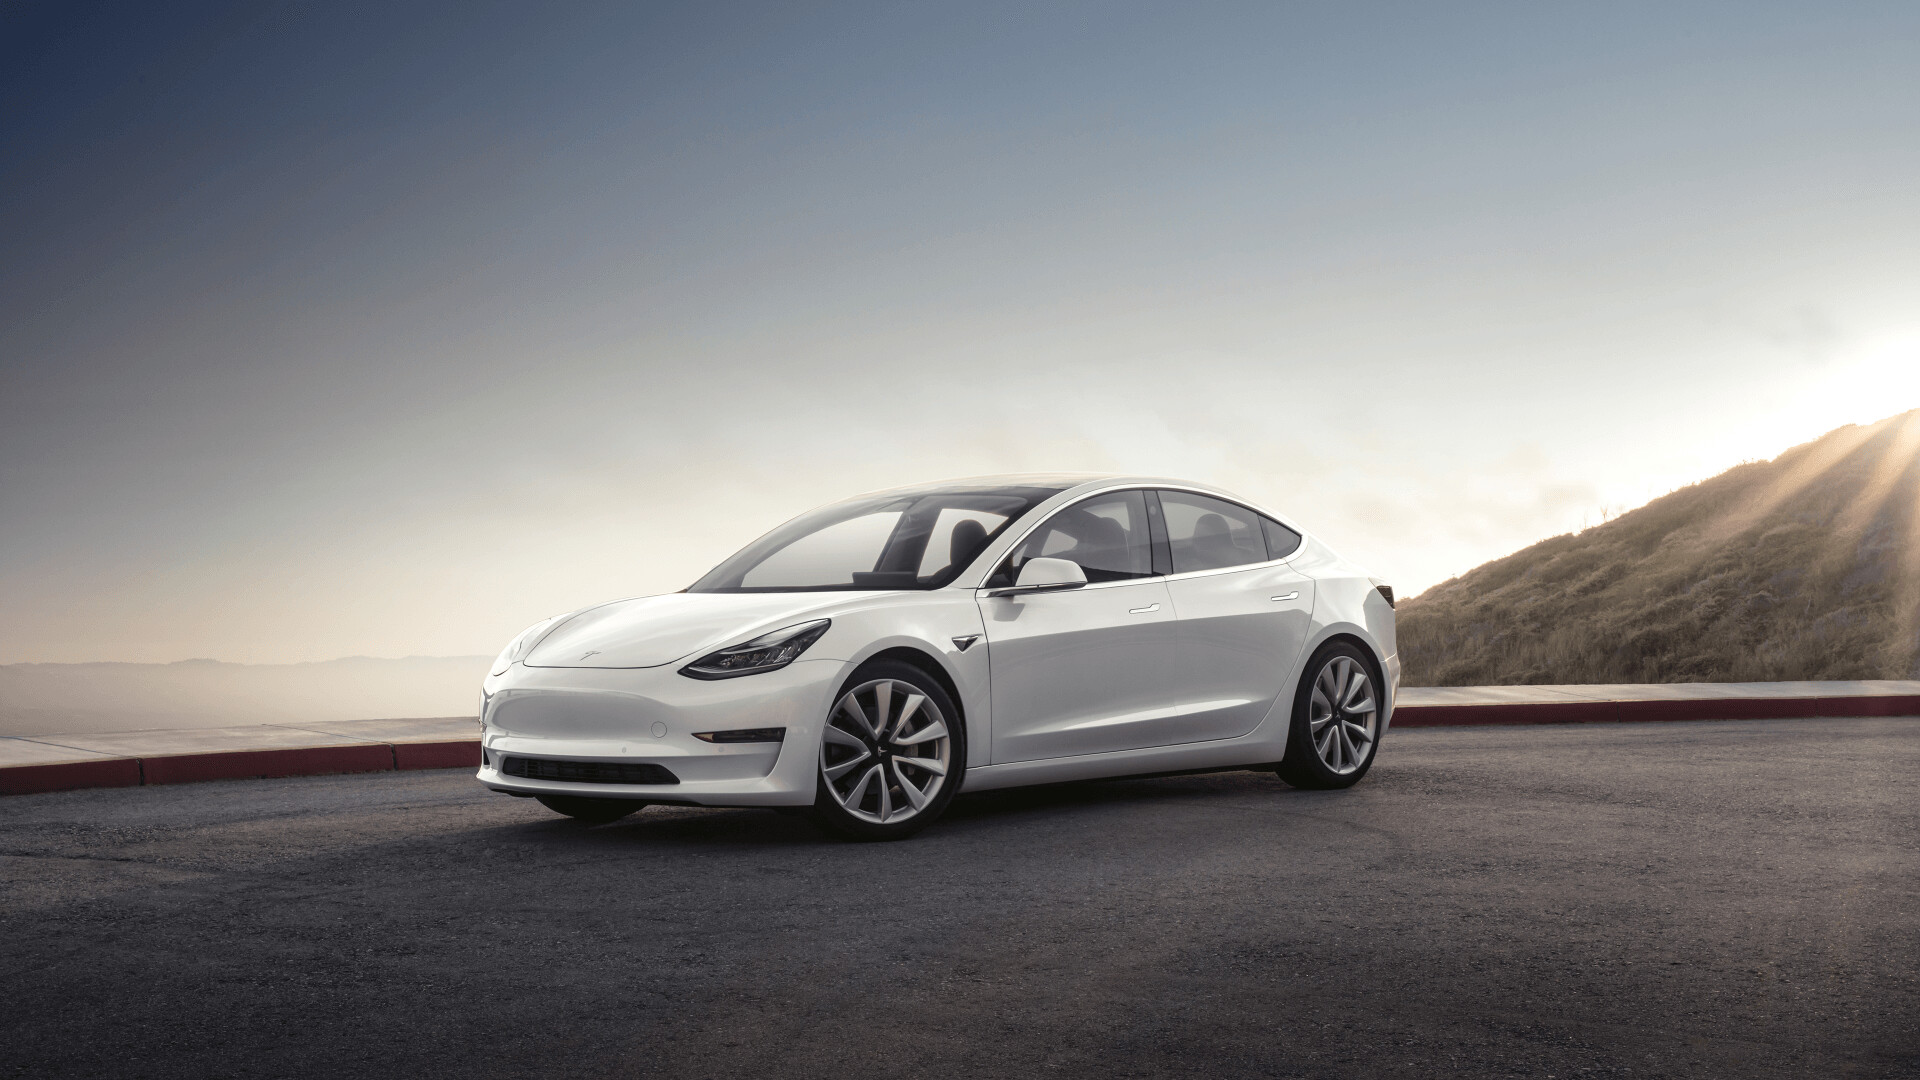 Tesla: The Model 3, The bestselling electric car in world history. 1920x1080 Full HD Background.